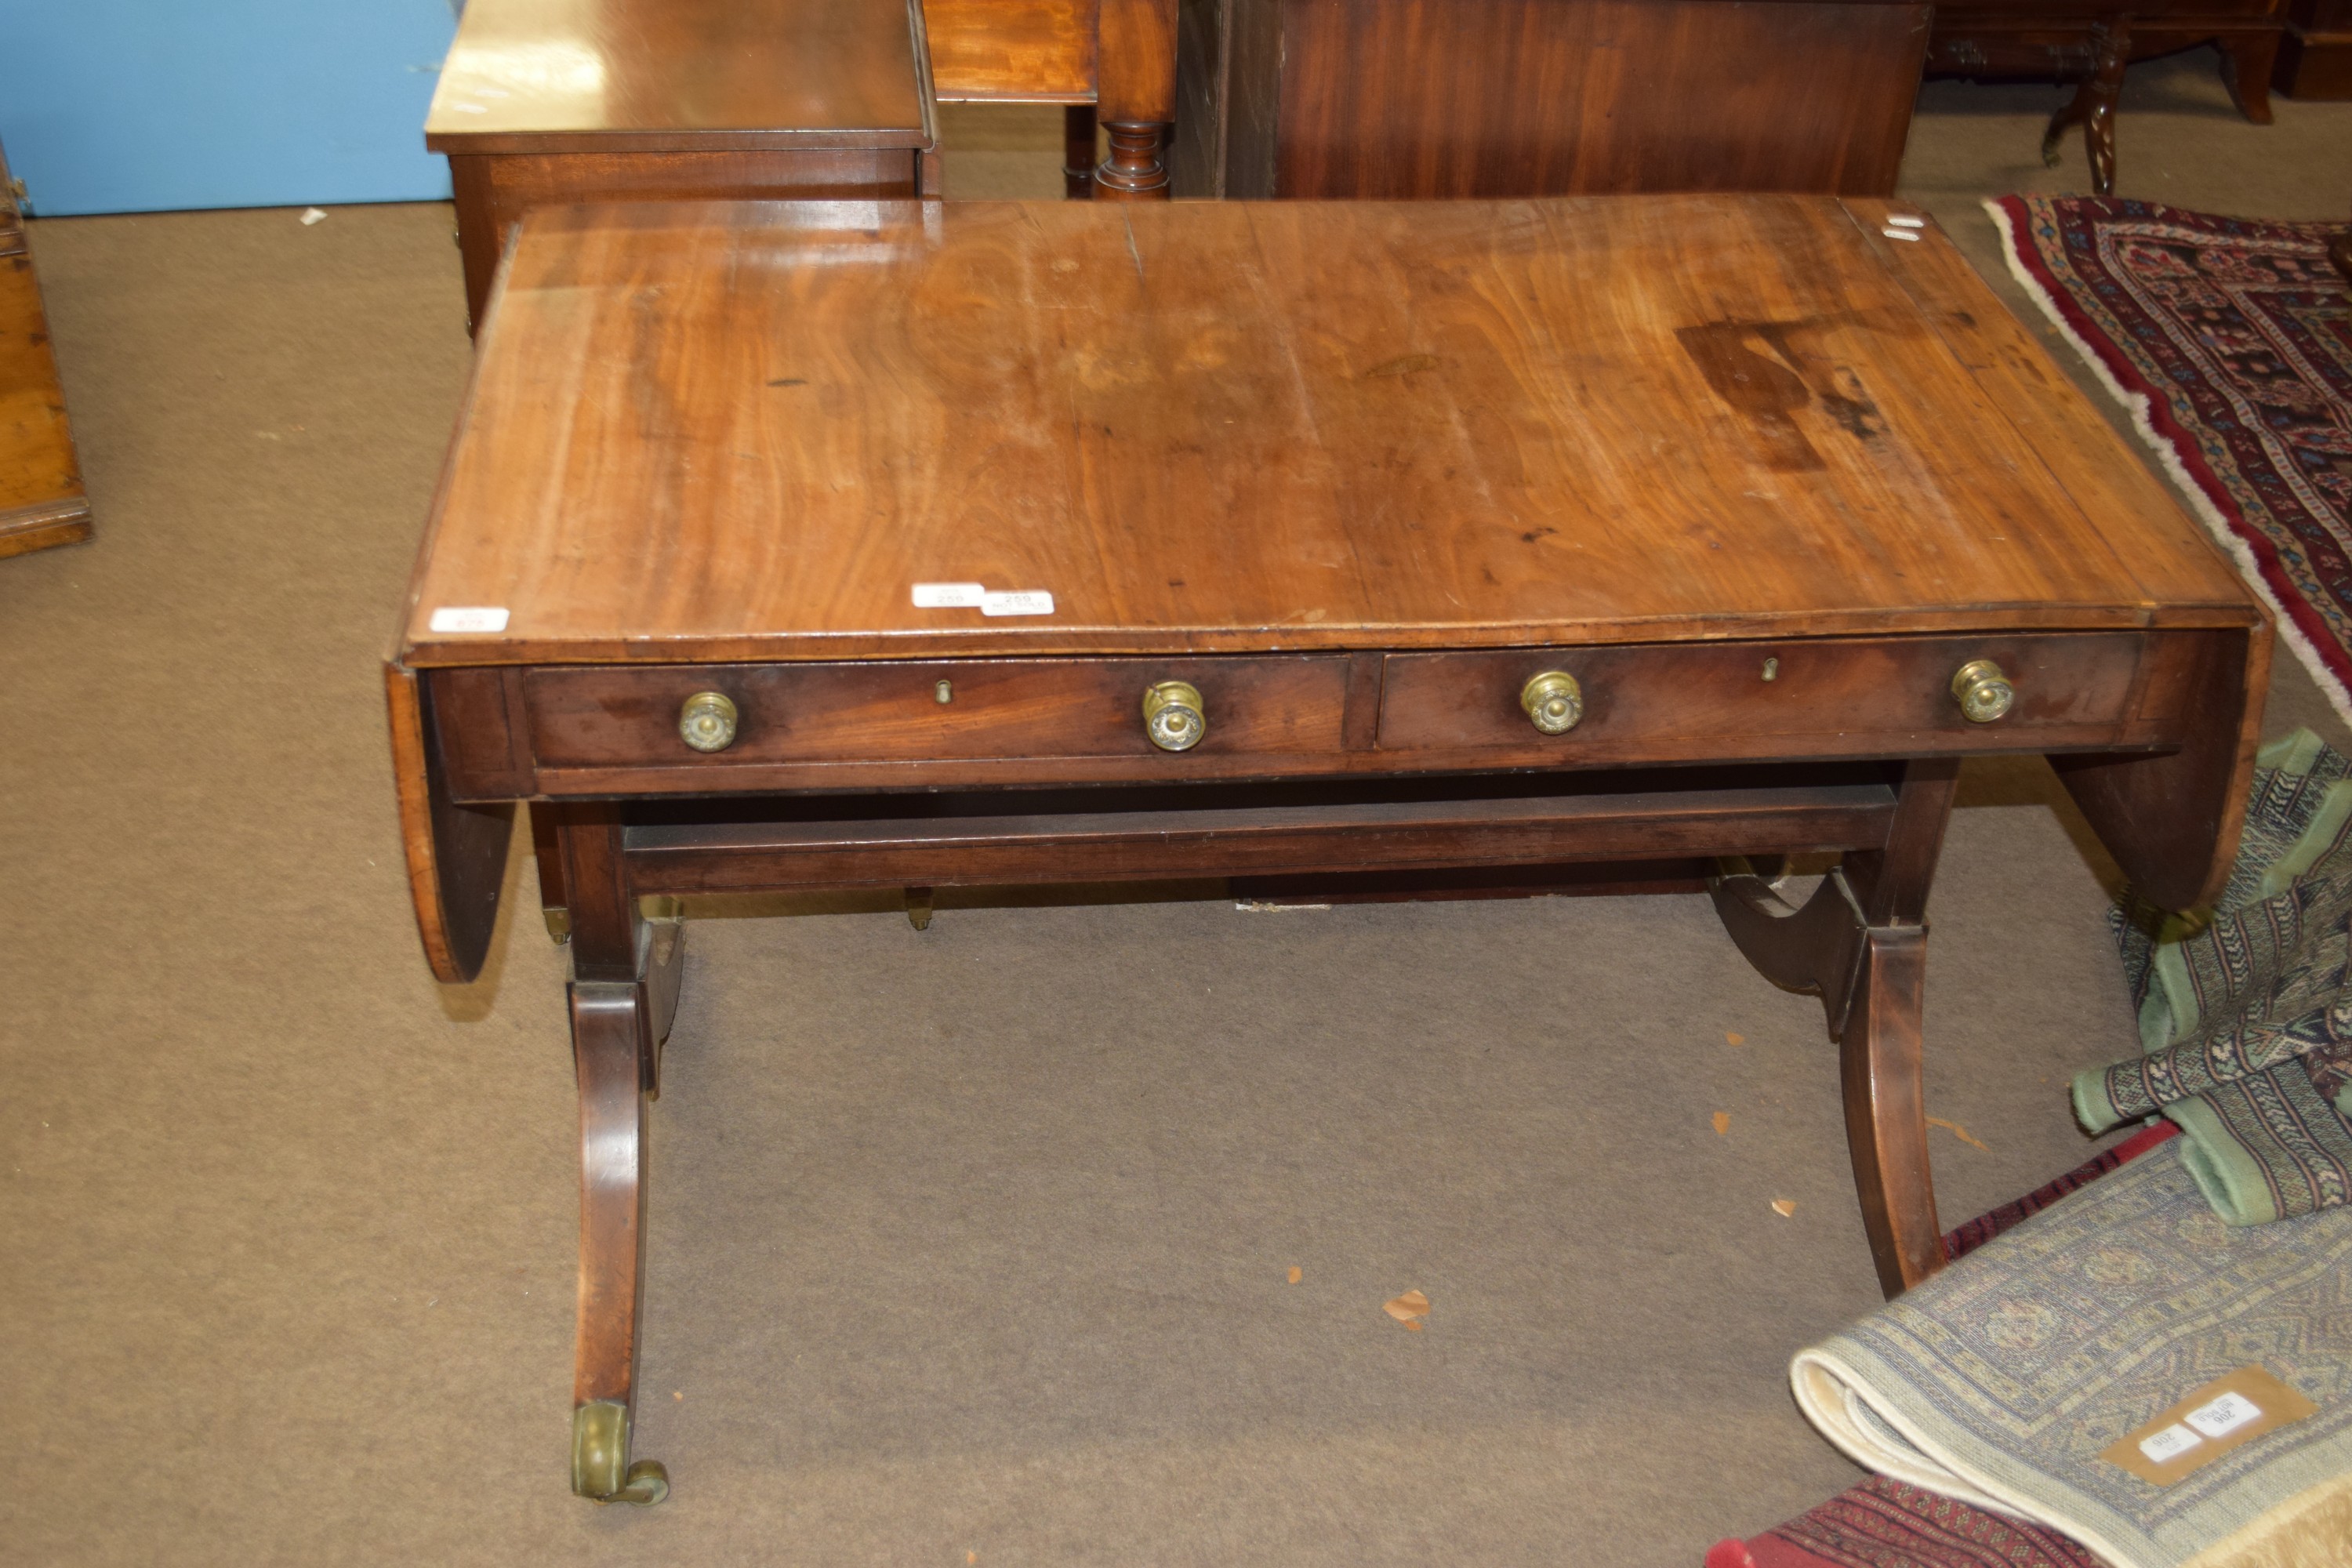 19th century mahogany sofa table of typical form with two drawers beneath, width approx 105cm